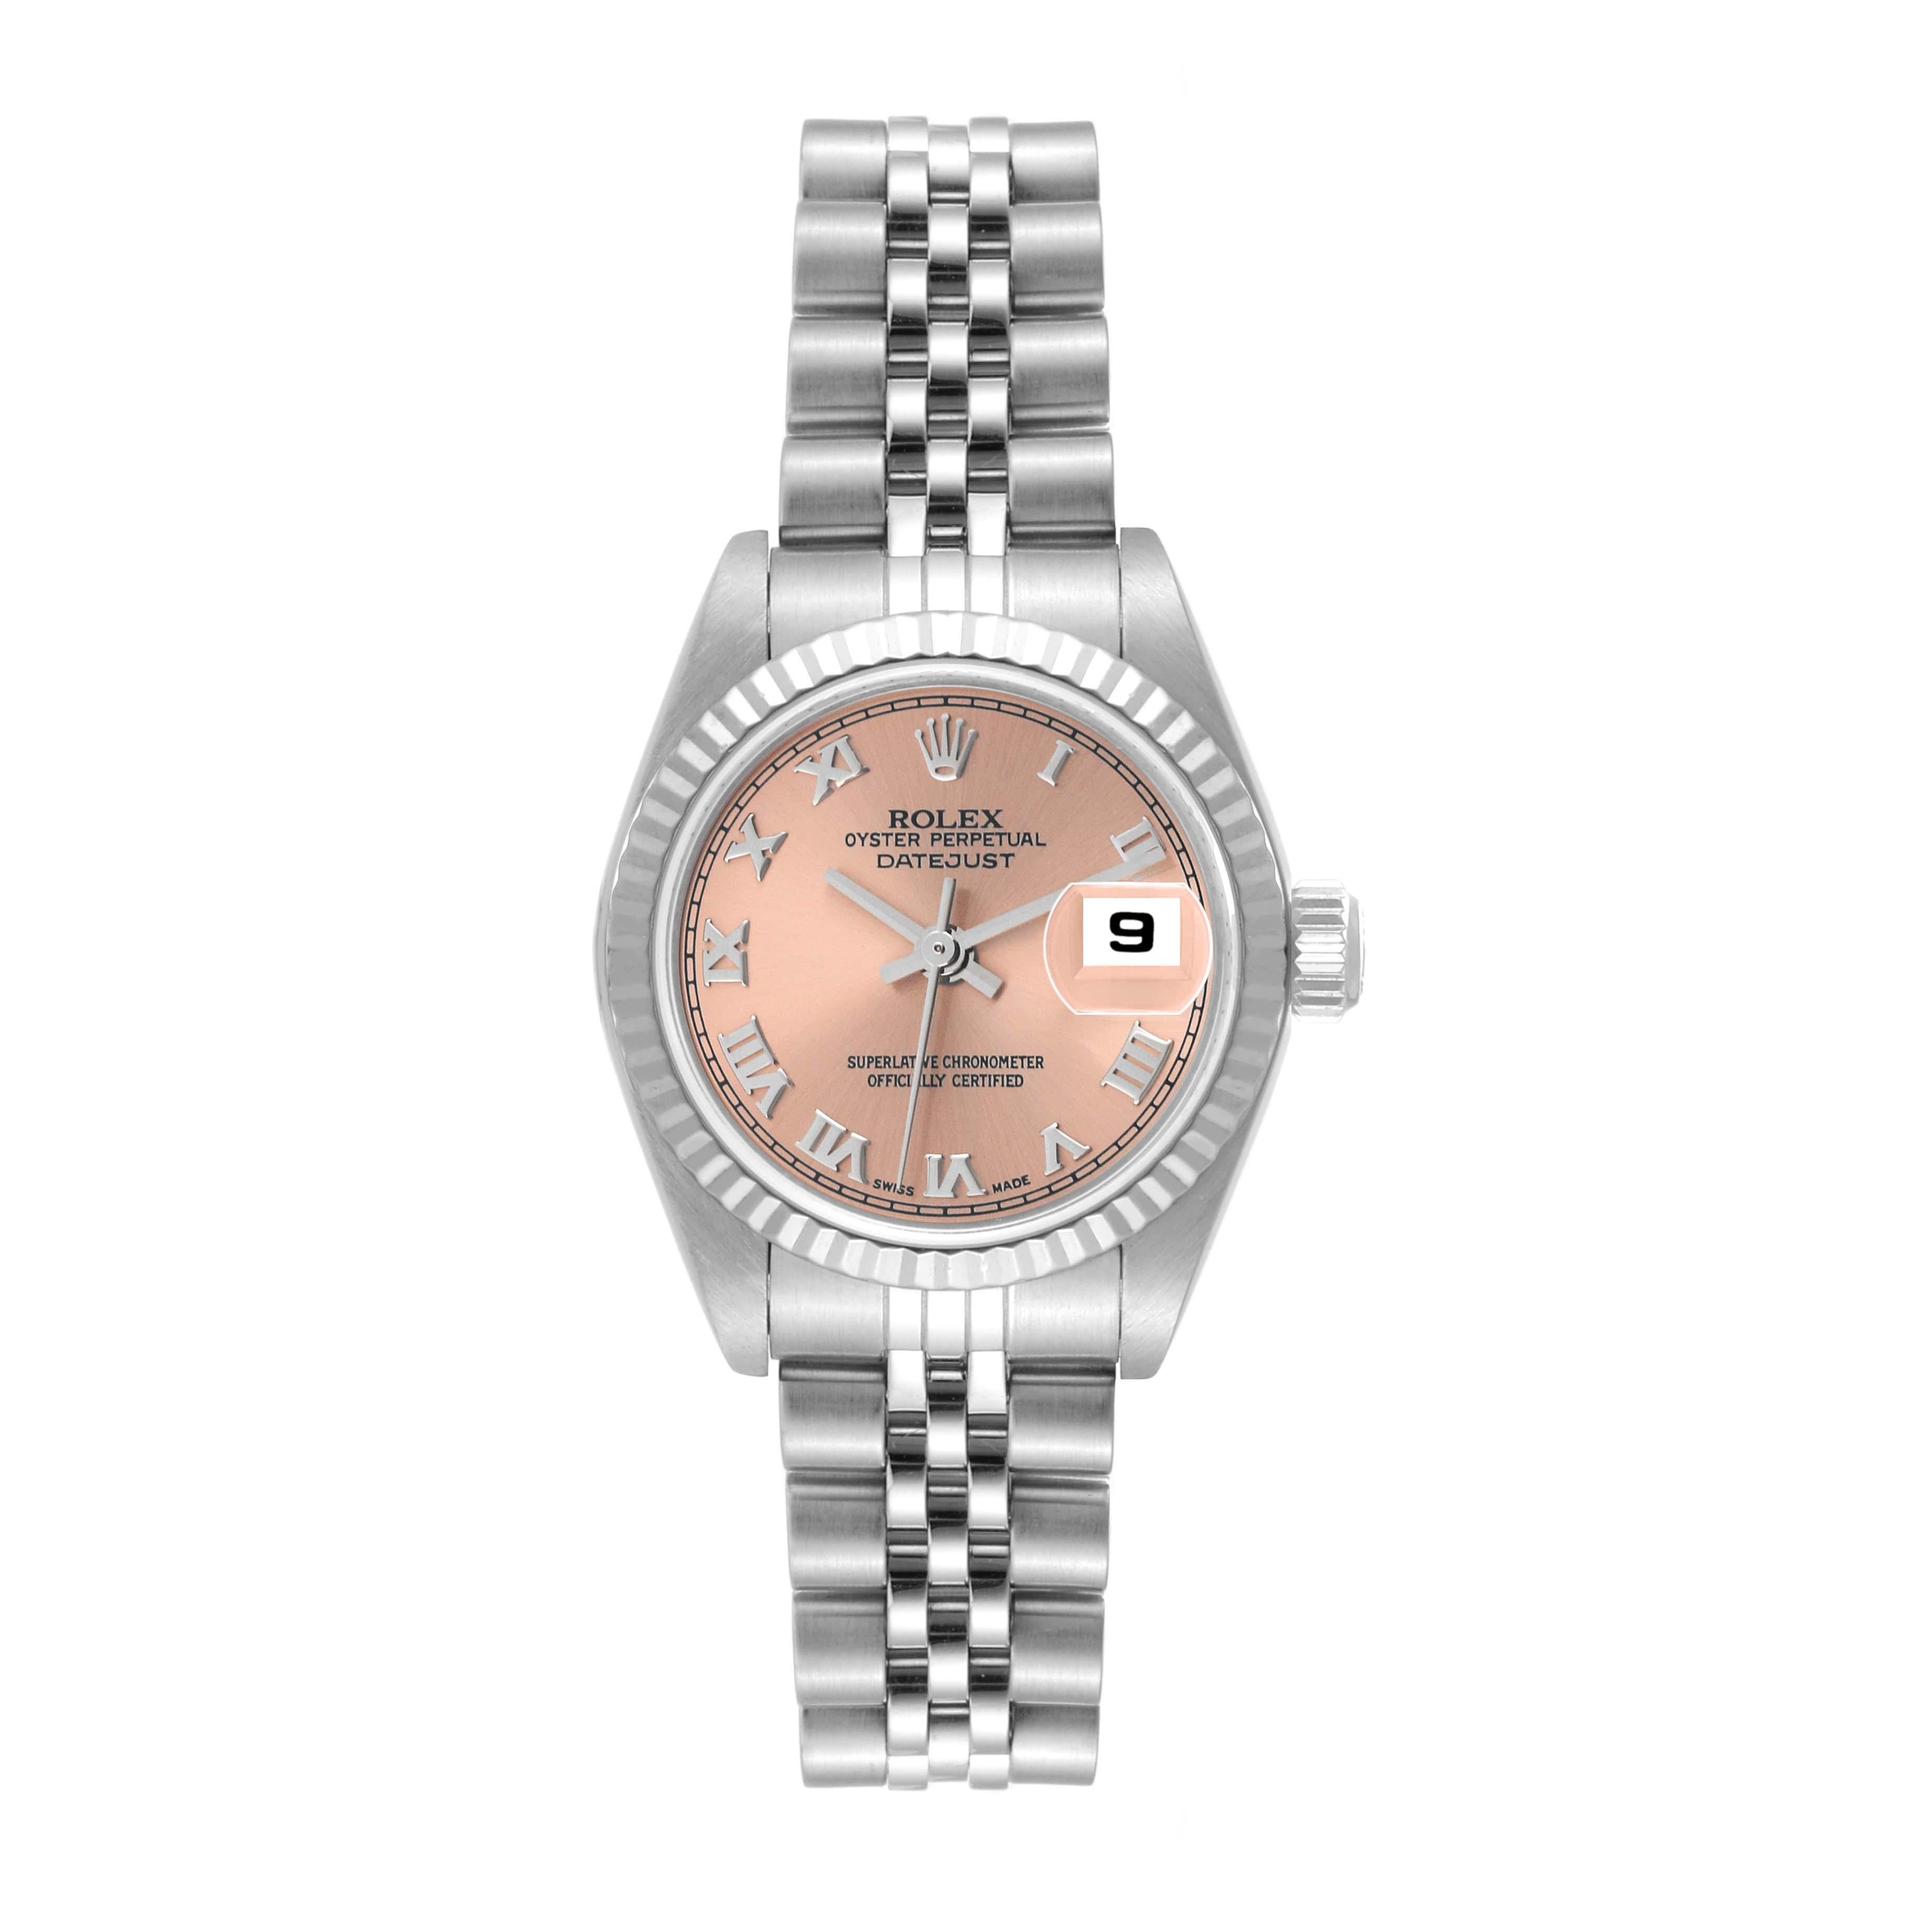 Rolex Datejust Salmon Dial White Gold Steel Ladies Watch 79174. Officially certified chronometer automatic self-winding movement. Stainless steel oyster case 26.0 mm in diameter. Rolex logo on the crown. 18K white gold fluted bezel. Scratch